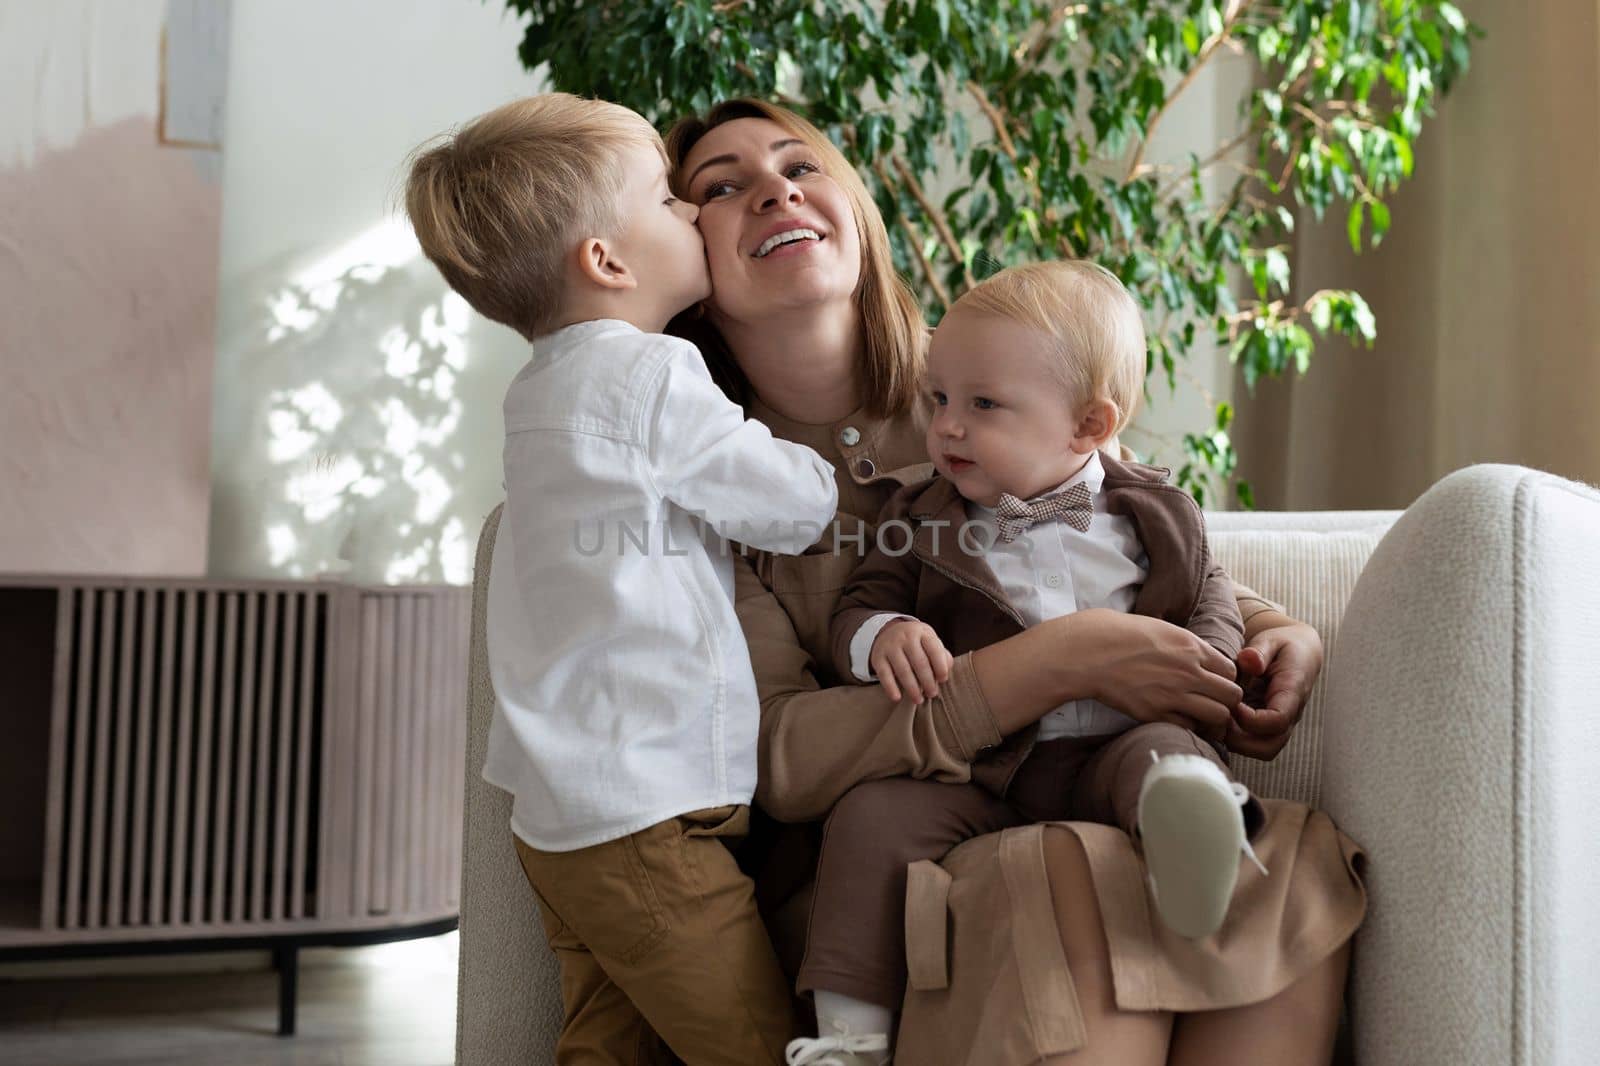 mom with two adorable sons one of whom kisses her on the cheek, mother's day concept by TRMK